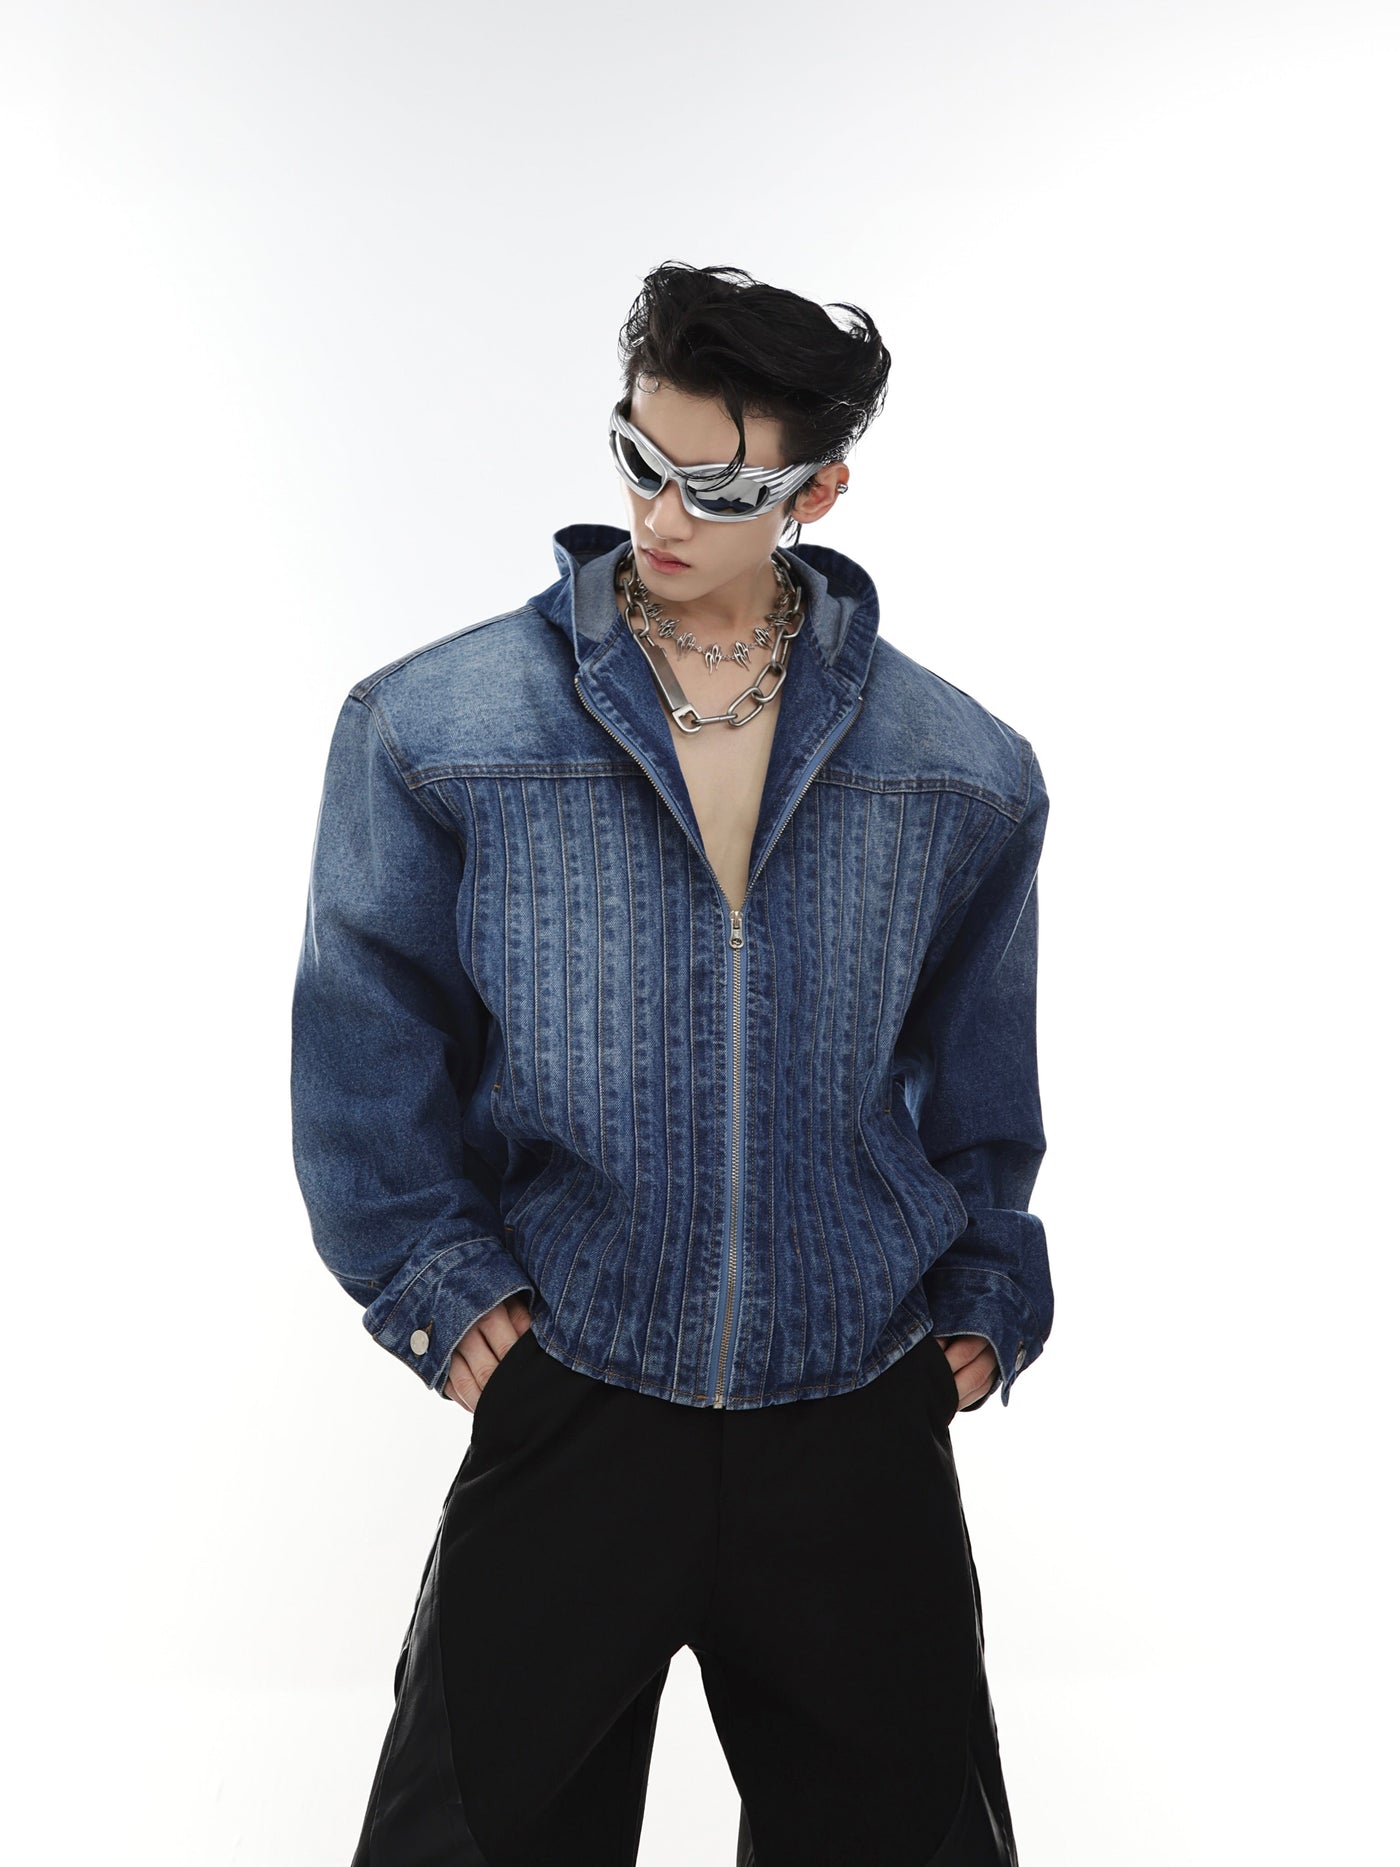 Argue Culture Washed Pleated Style Hooded Jacket Korean Street Fashion Jacket By Argue Culture Shop Online at OH Vault